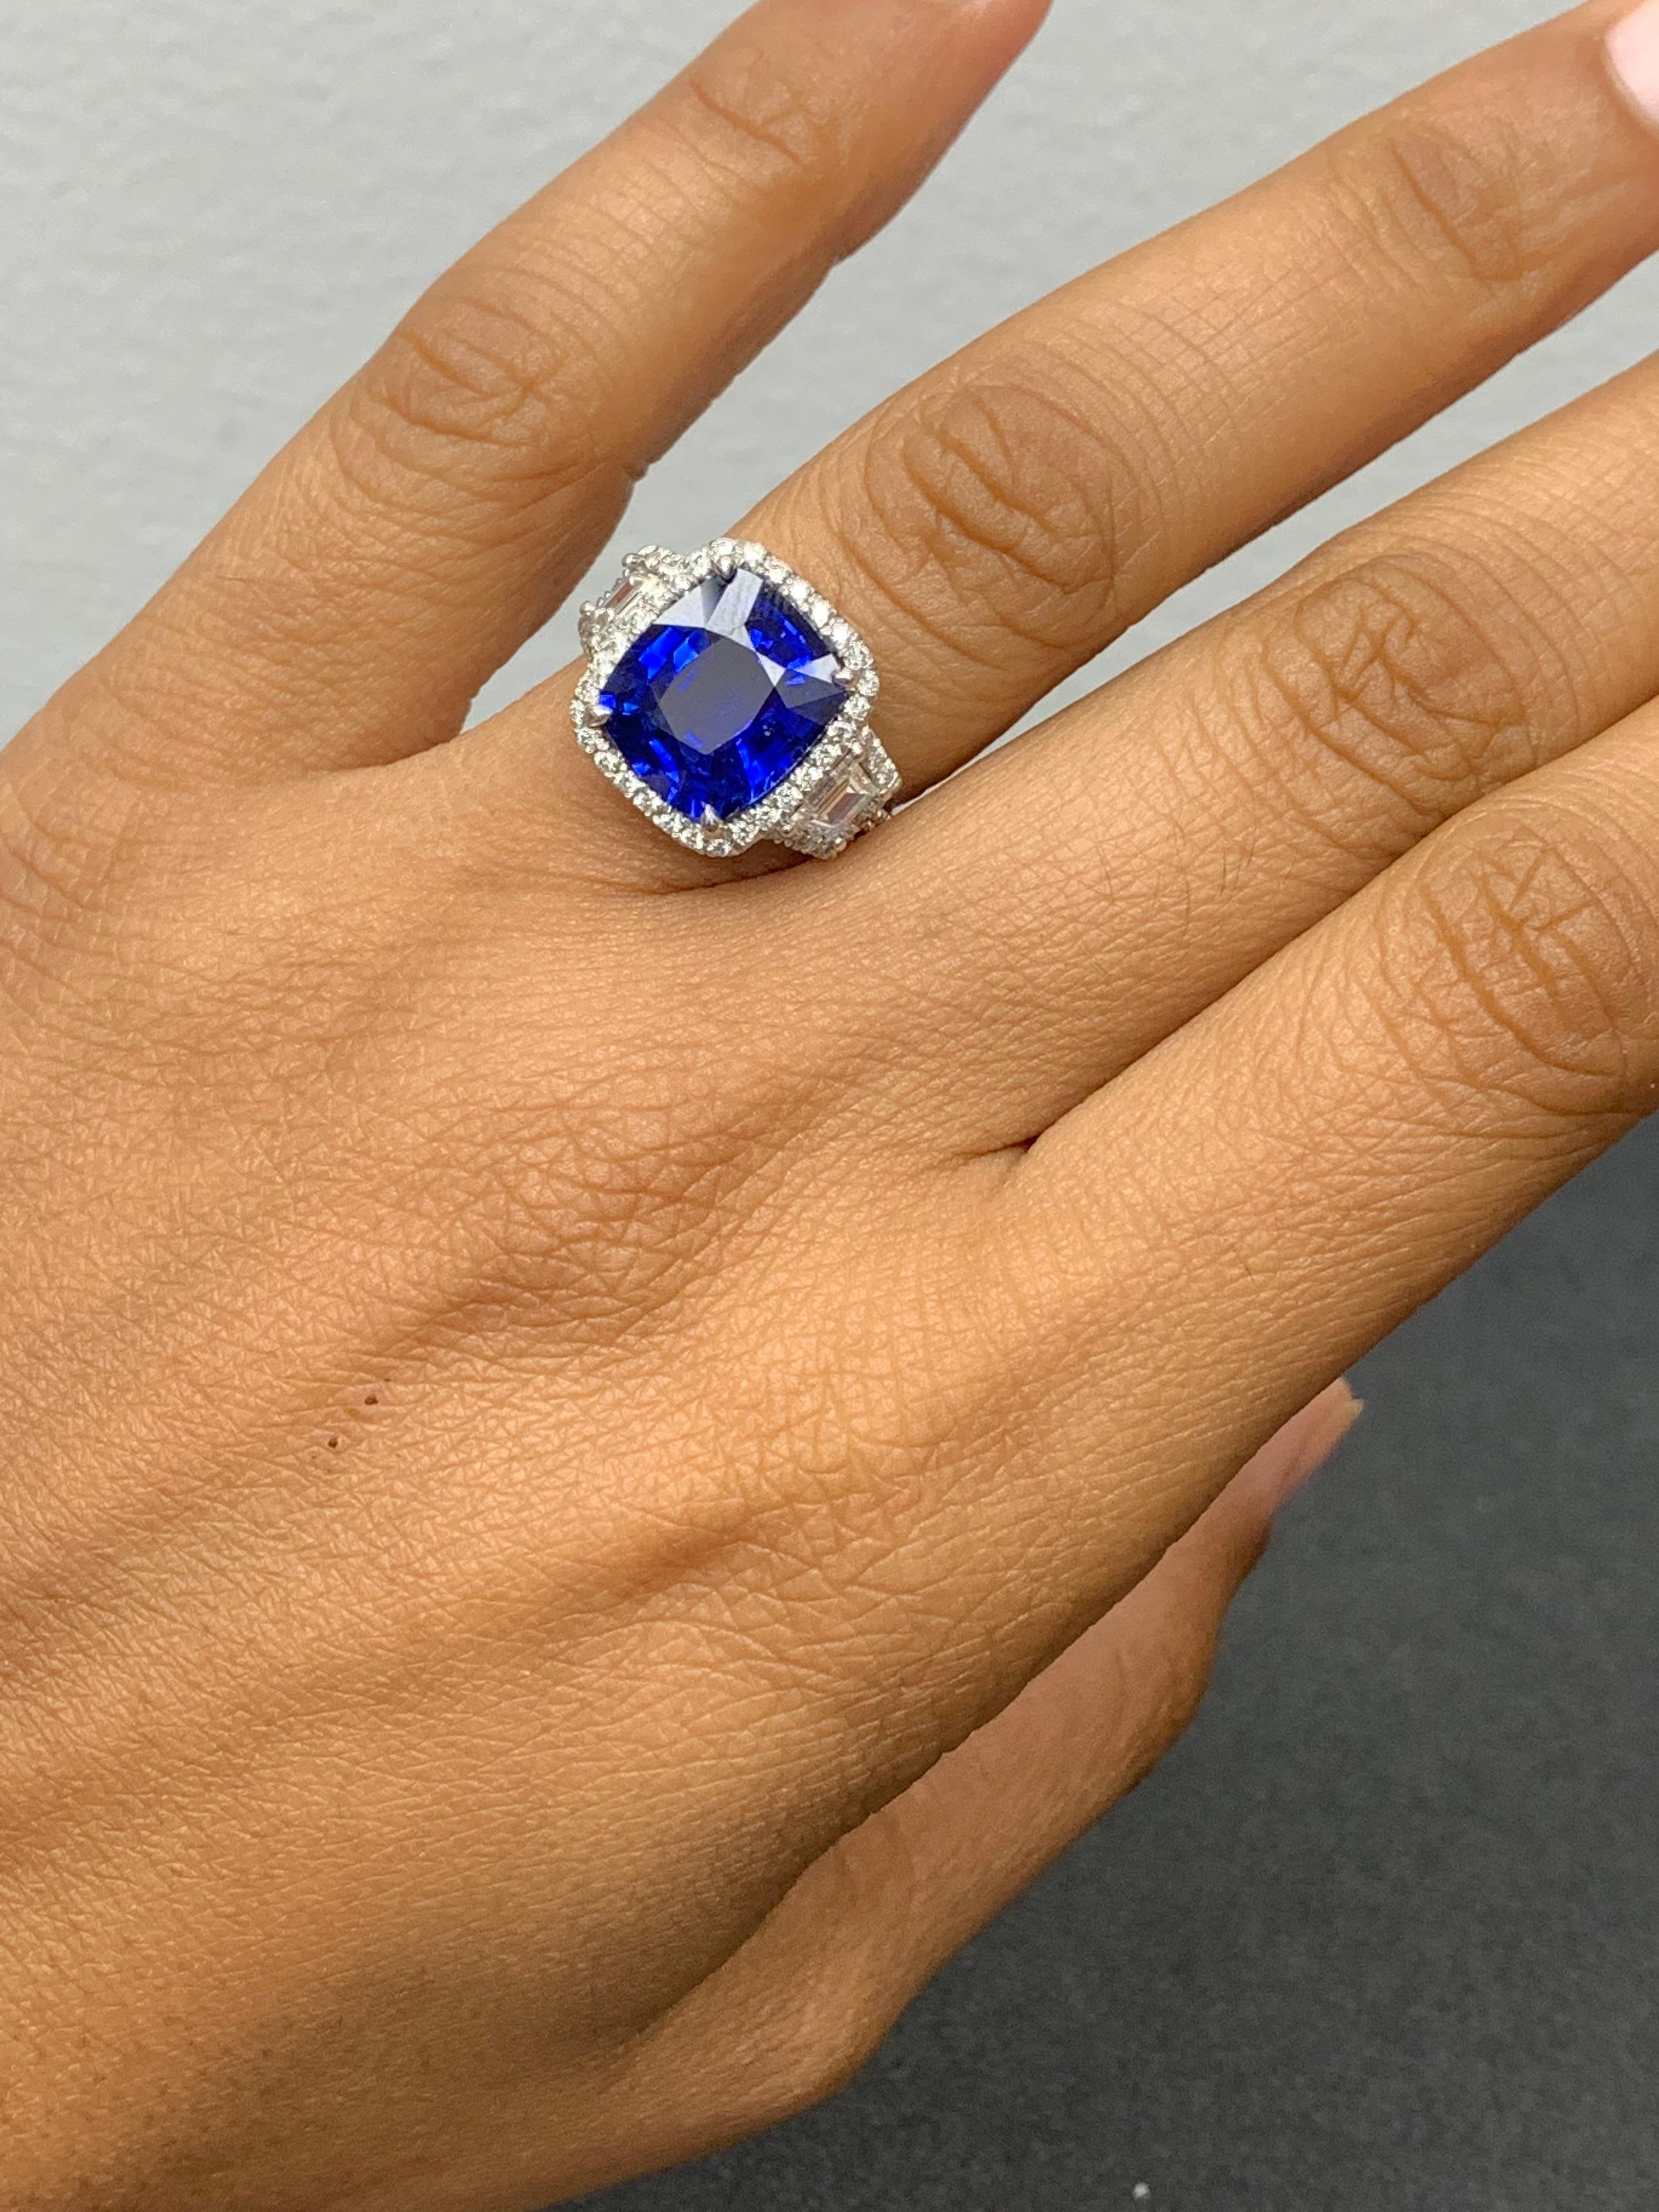 Certified 5.76 Carat Cushion Cut Sapphire Diamond 3 Stone Ring in Platinum For Sale 4